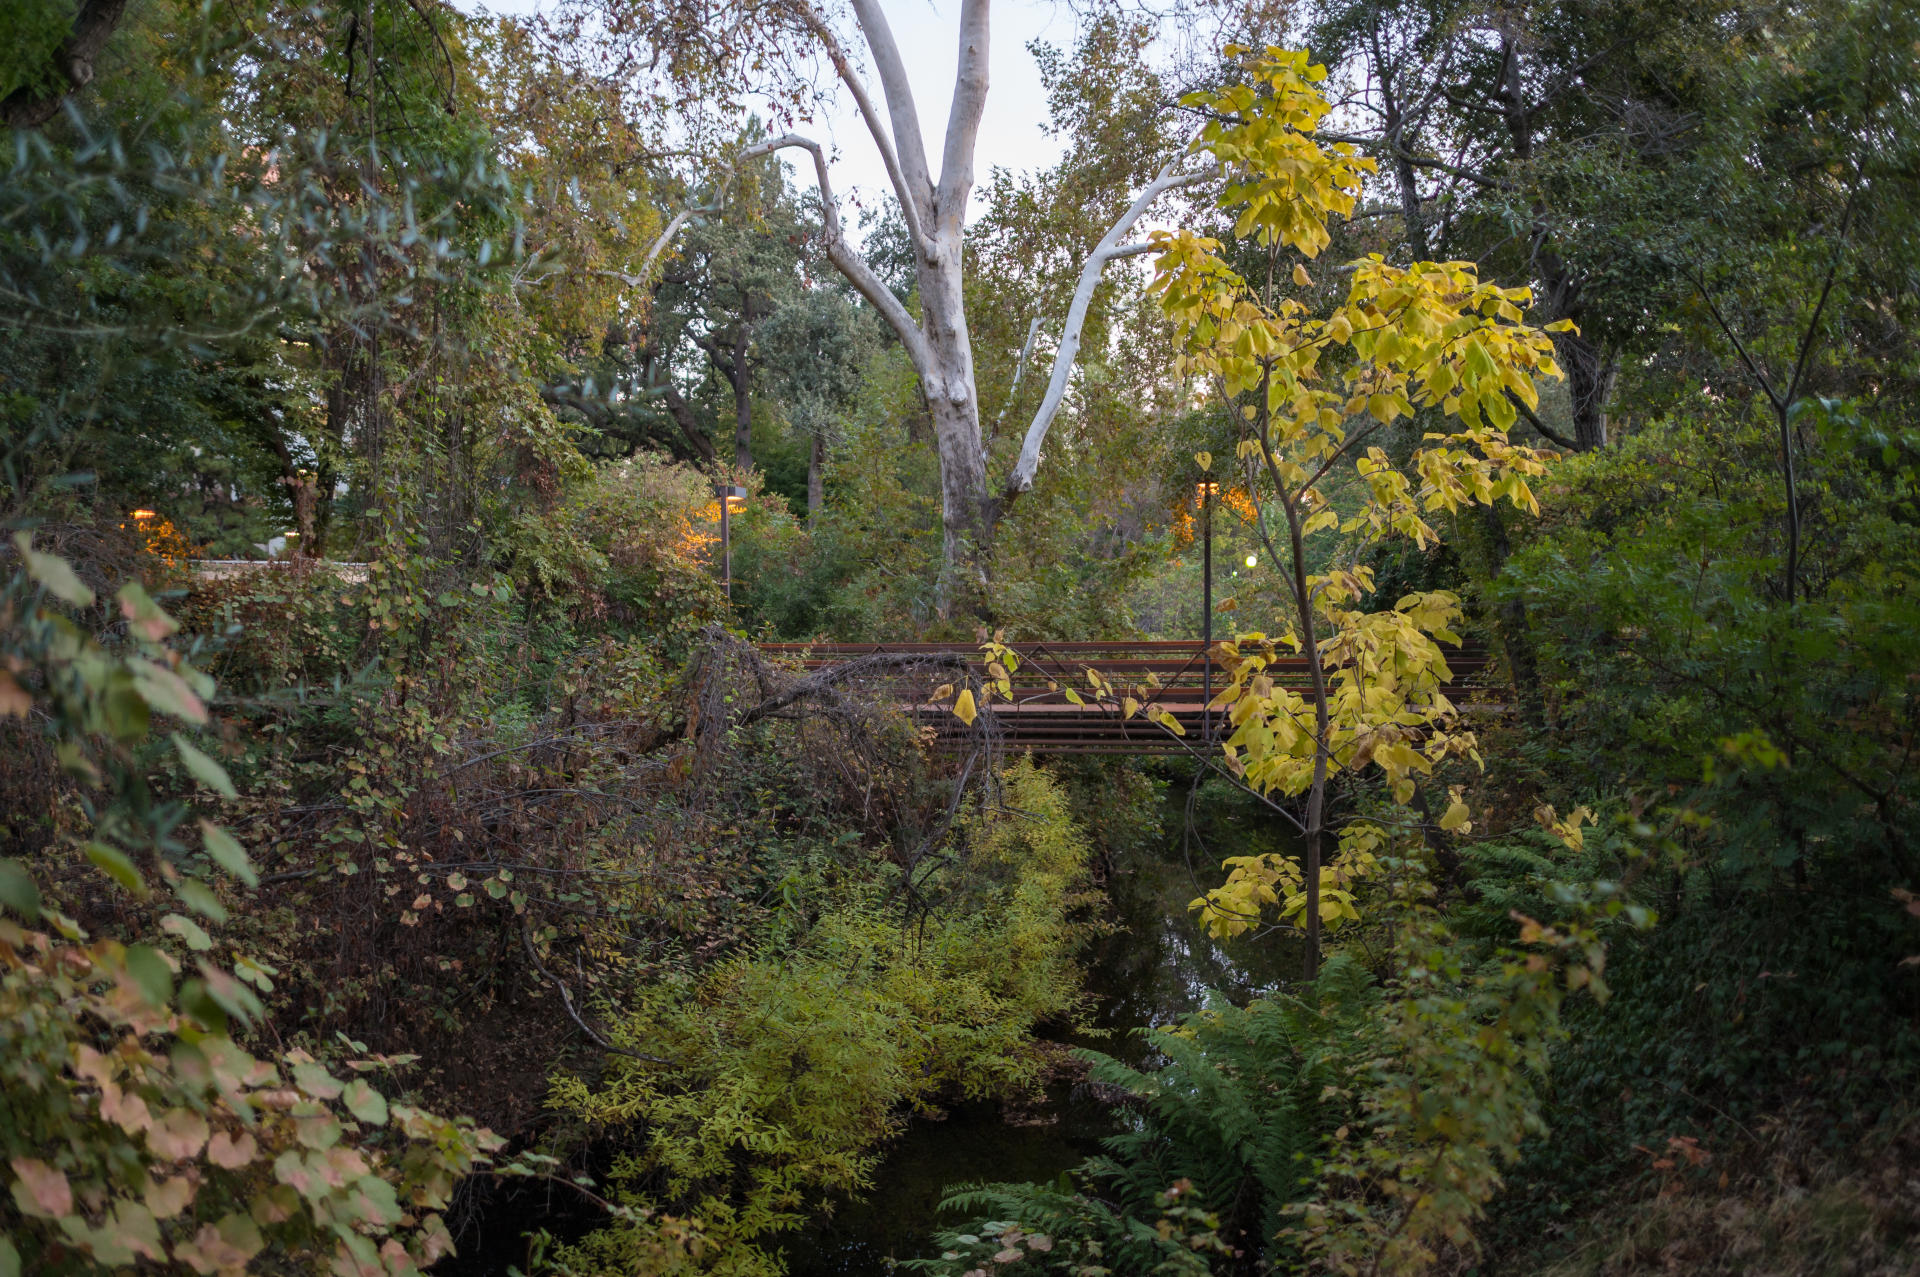 A footbridge extends over a creek and is engulfed by trees of varying colors